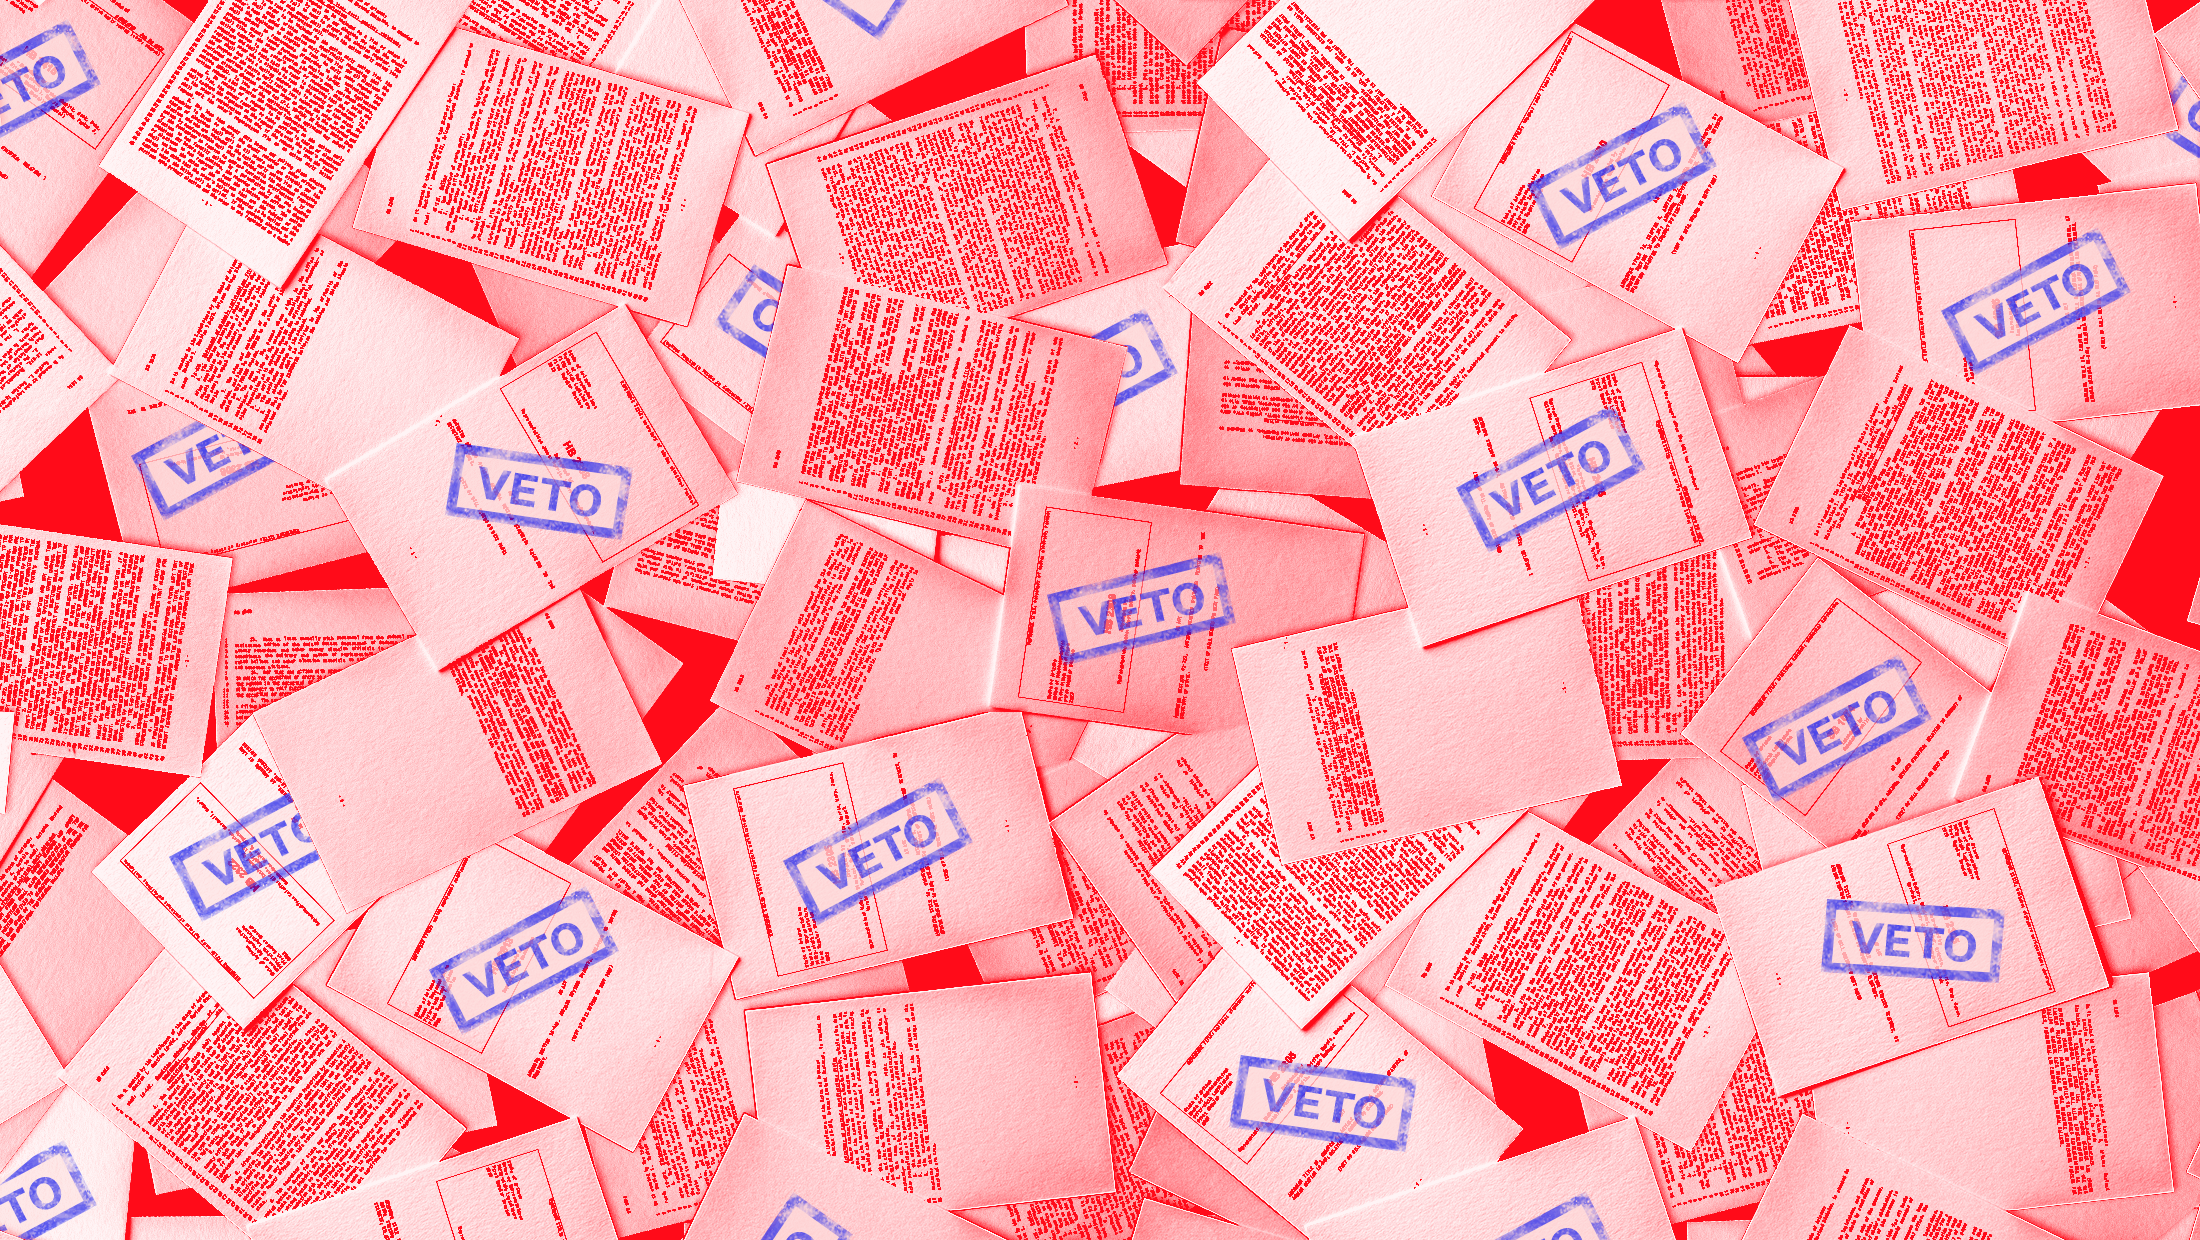 A pile of red-tinted bills with occasional blue VETO stamps.